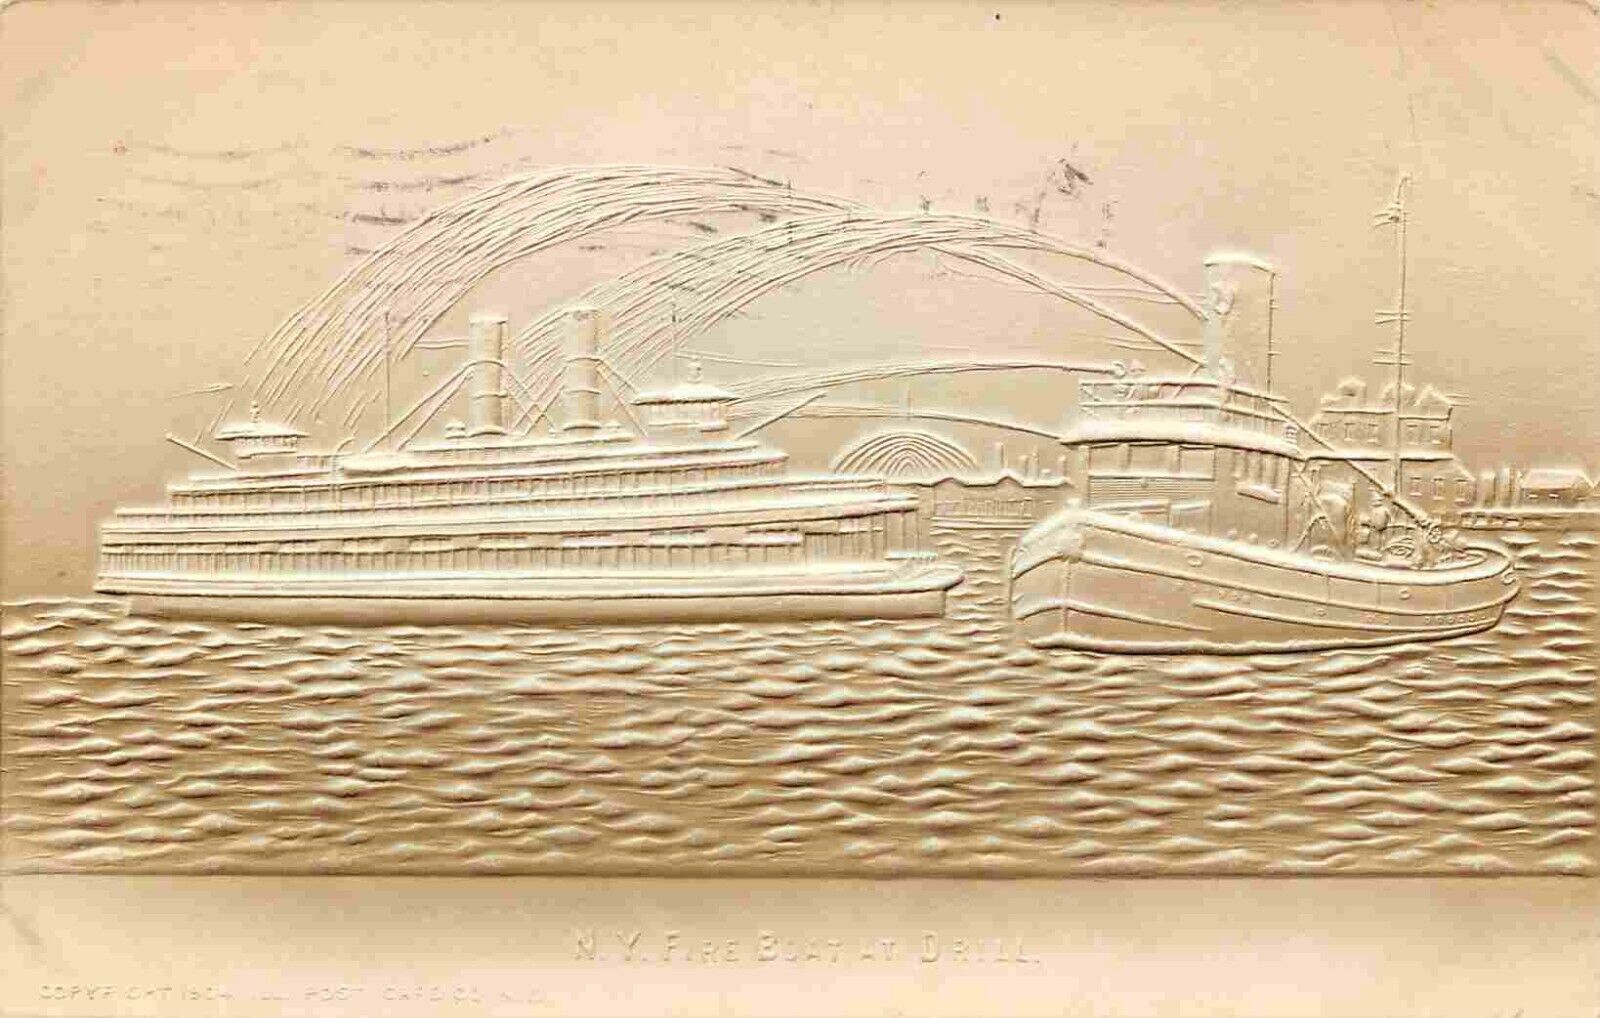 Fire Tug Boat at Drill New York City 1907 bas relief postcard